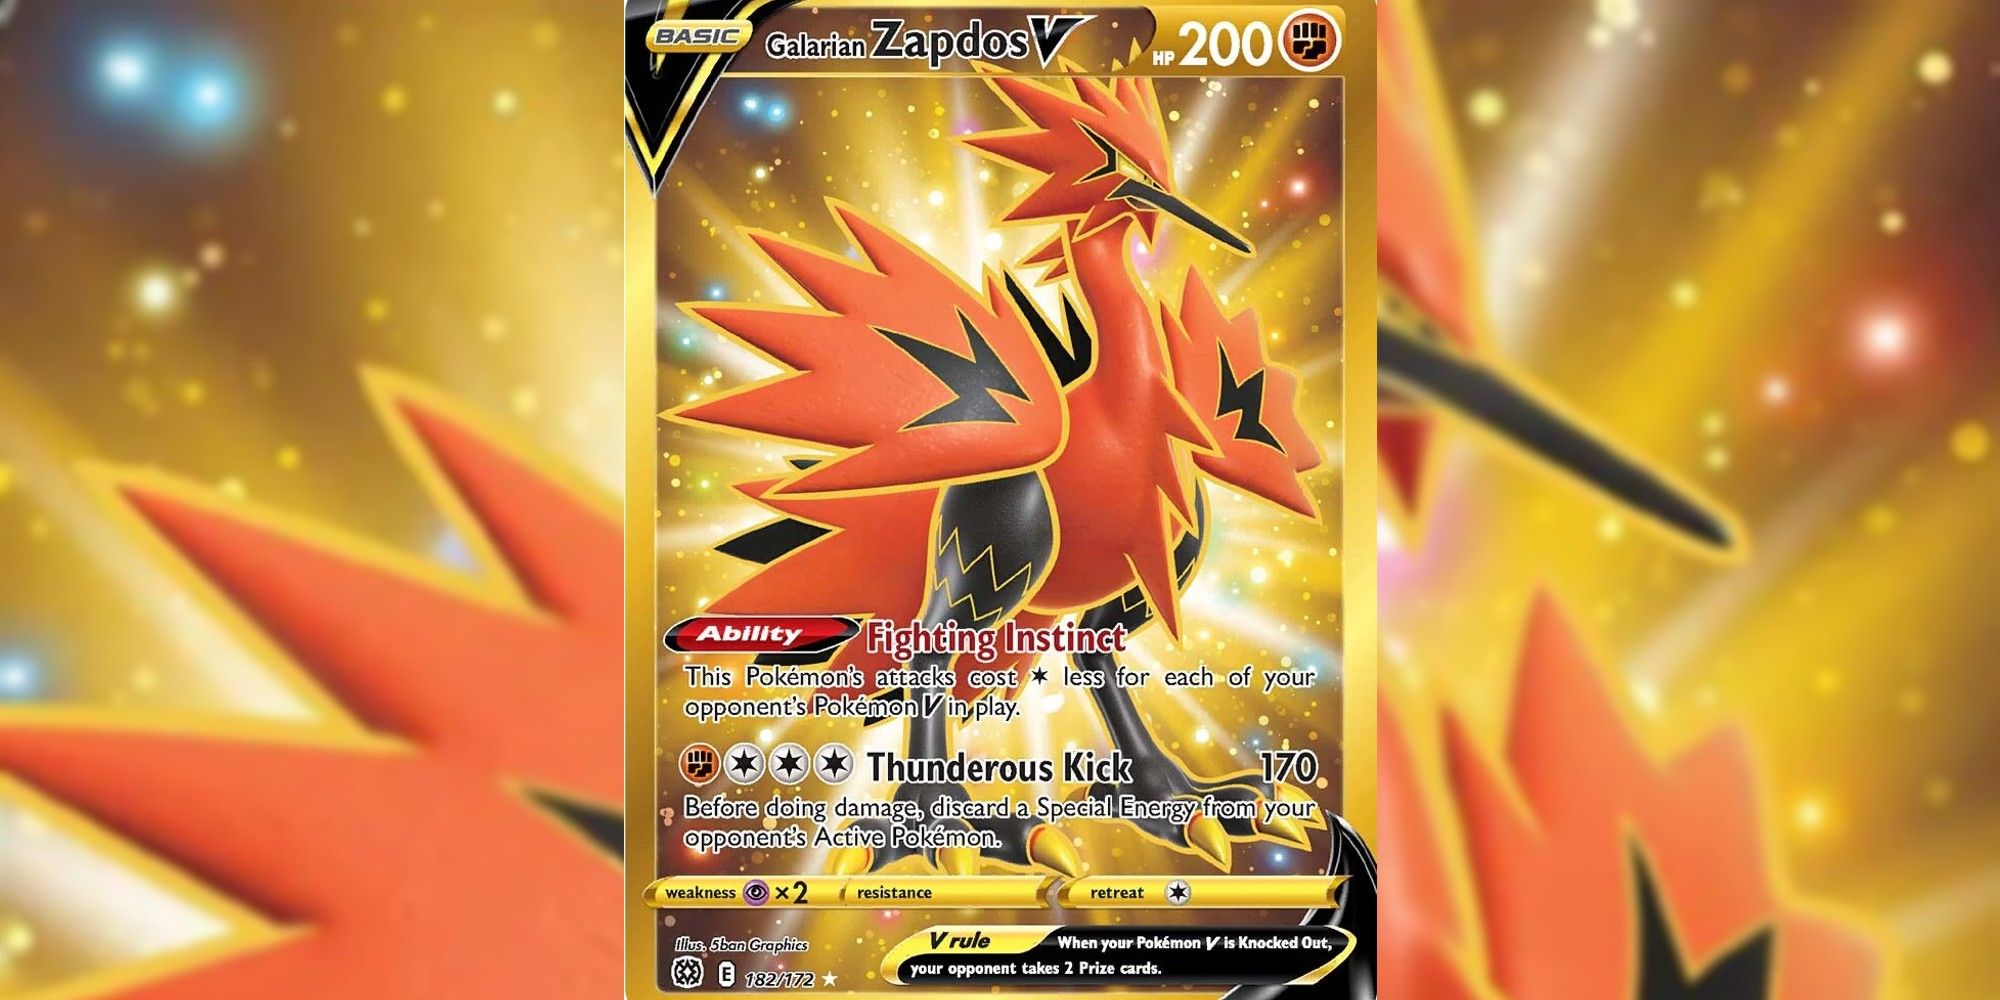 Galarian Zapdos V card with blurred background